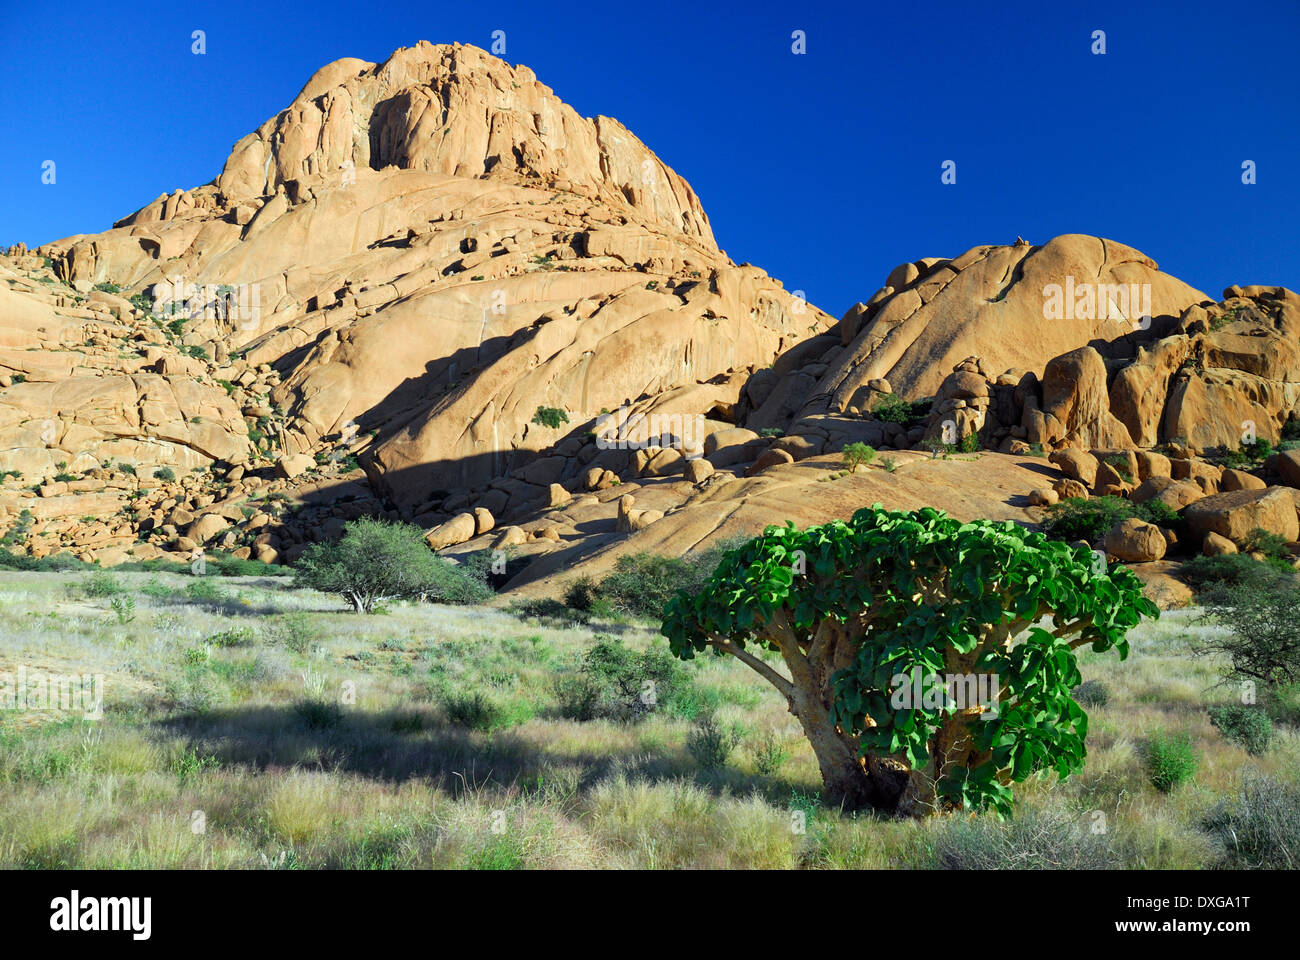 Succulent Cyphostemma currori plant growing at Spitzkoppe, Namibia Stock Photo